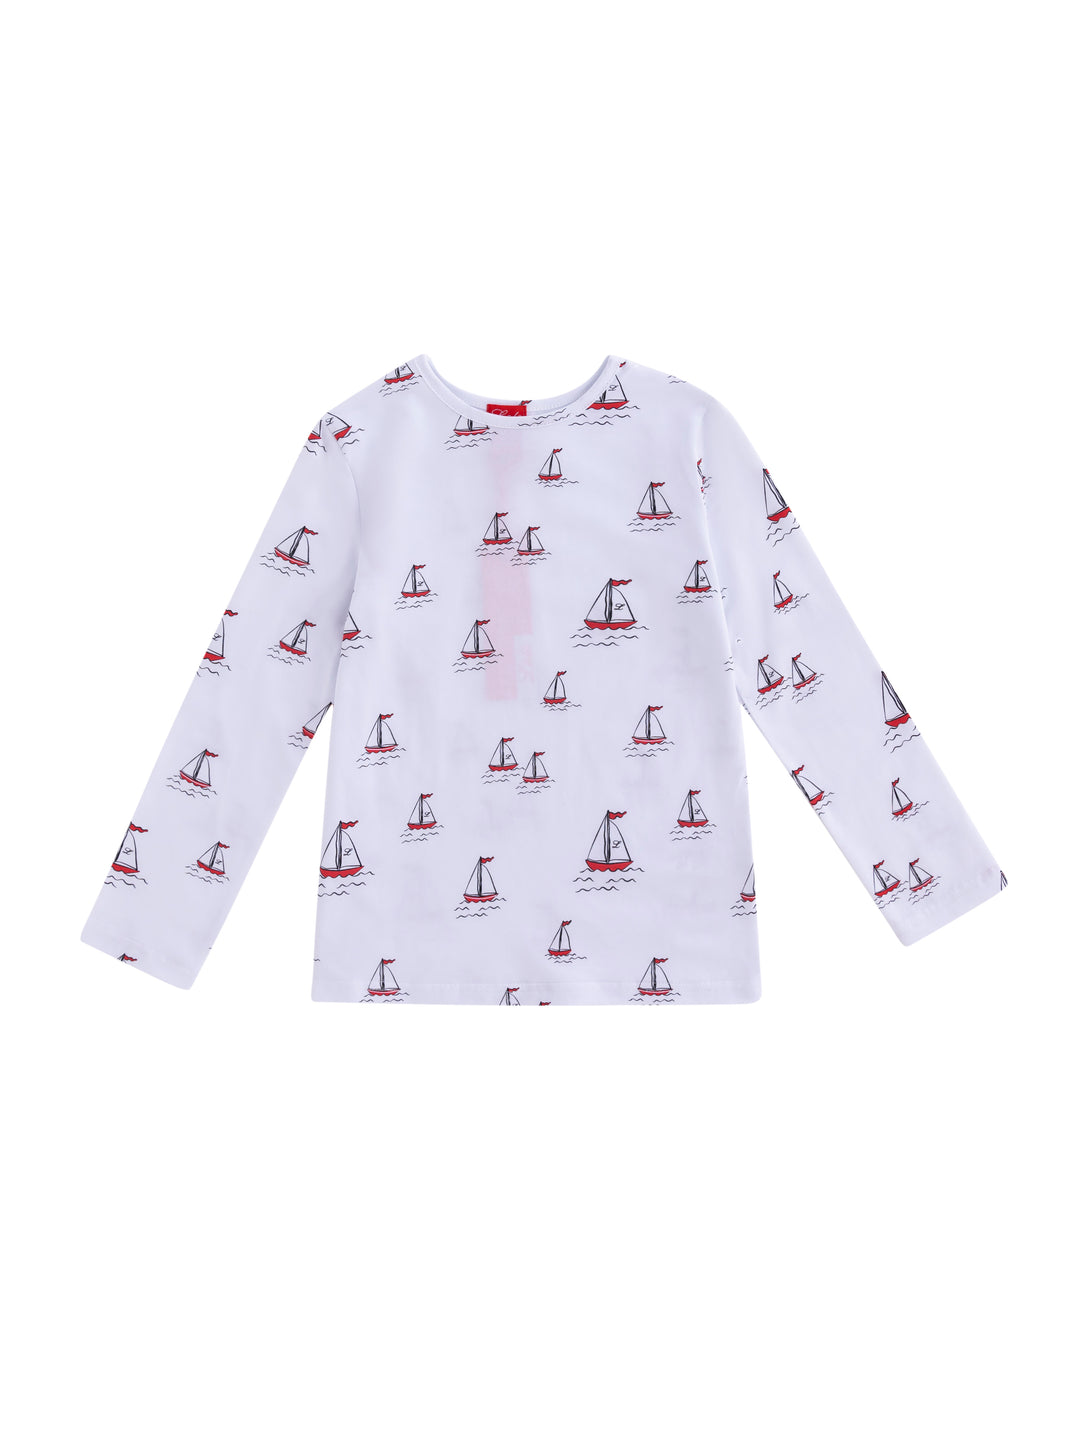 All Over Boat Print Long Sleeve Top